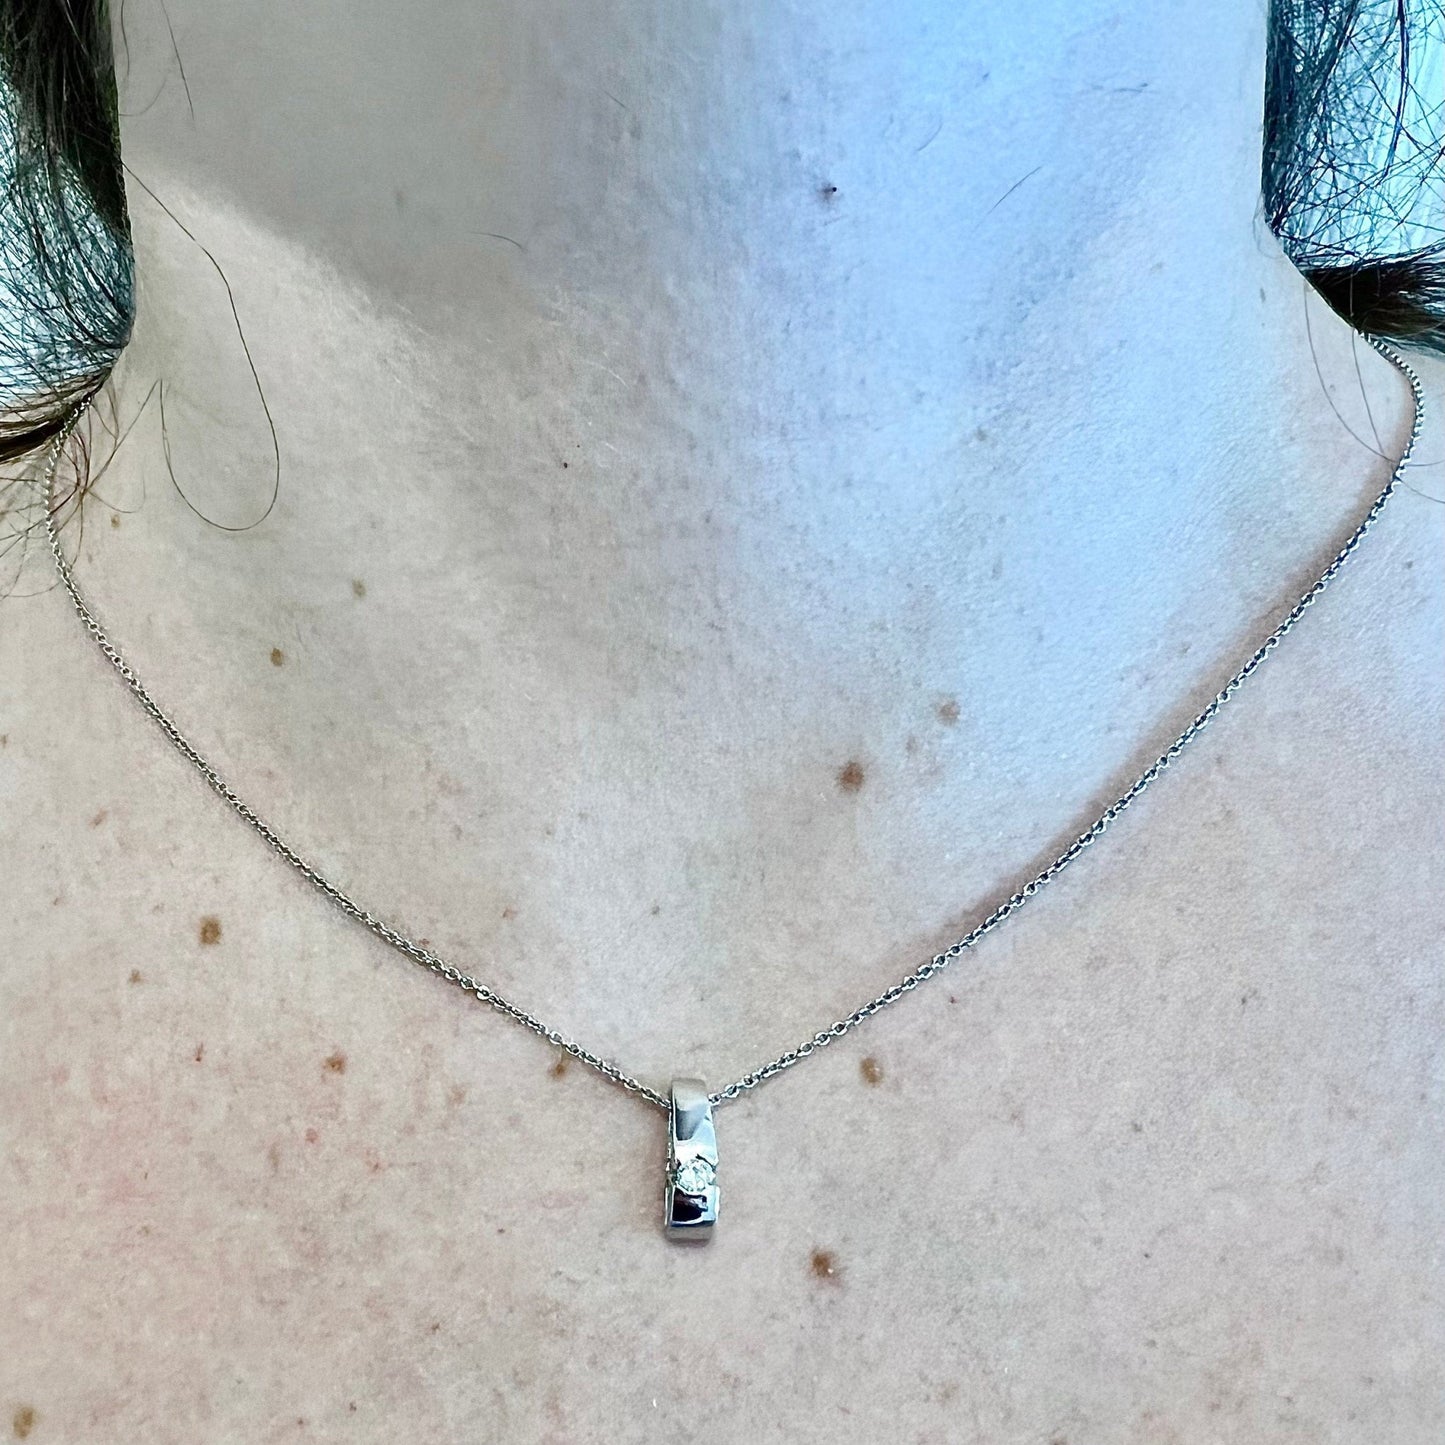 18K Diamond Solitaire Pendant Necklace - White Gold Diamond Pendant - April Birthstone - Diamond Necklace - Birthday Gift -Best Gift For Her